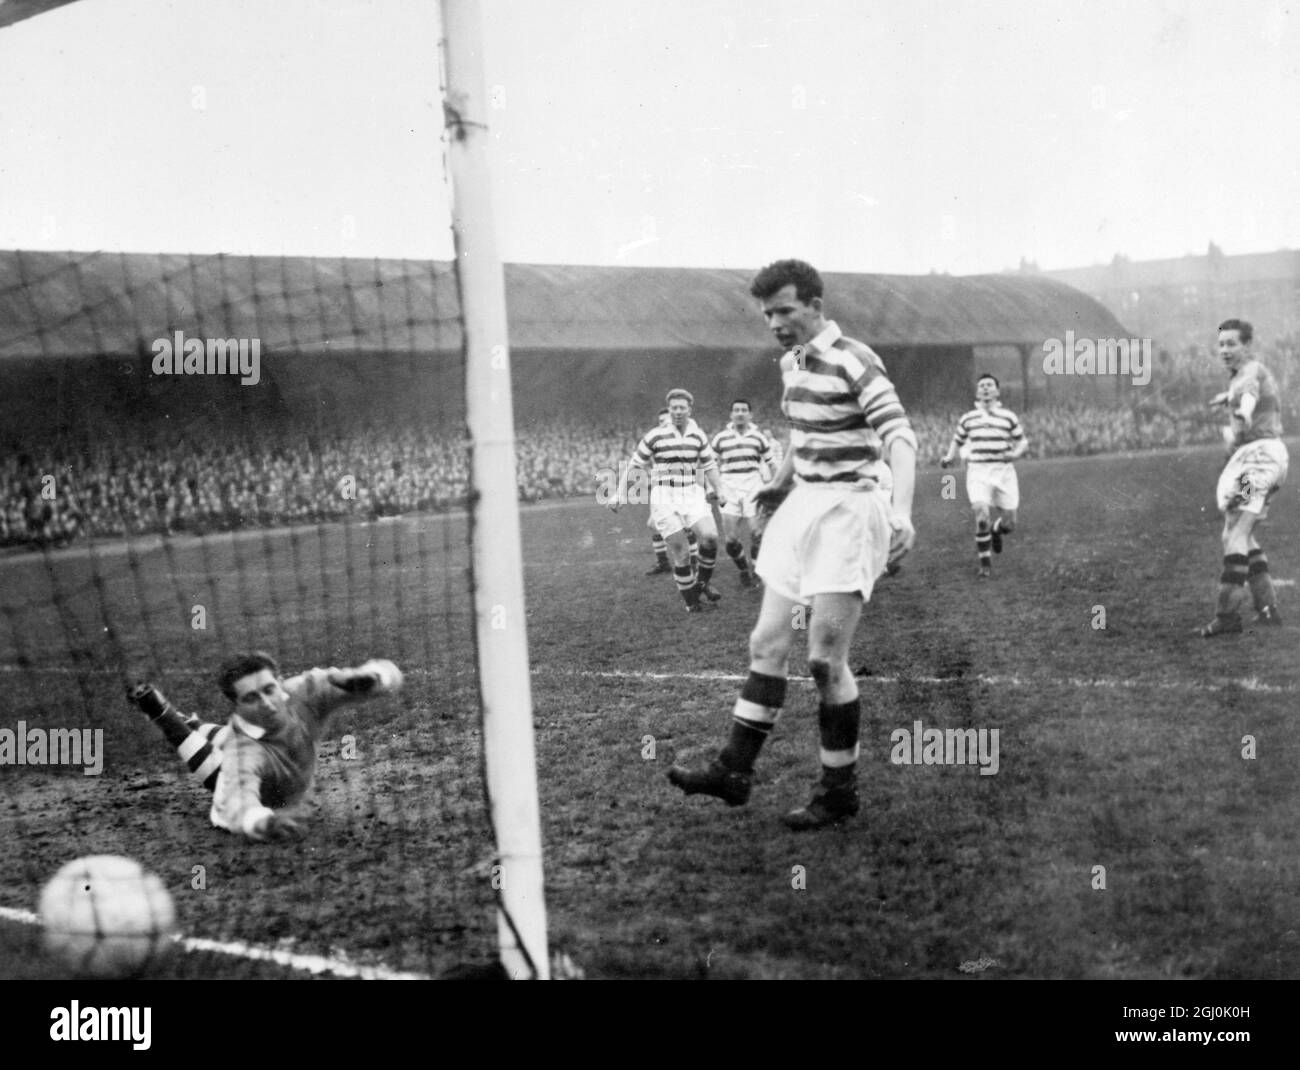 Ibbrox Park, Glasgow: Partick Thistle's first goal scored by Mathers (right) and Celtic's Mcphail (centre) watches the ball go past his goalkeeper Beattie during the Celtic versus Partick Thistle. Partick beat Celtic by three goals to two. 22 December 1957 Stock Photo